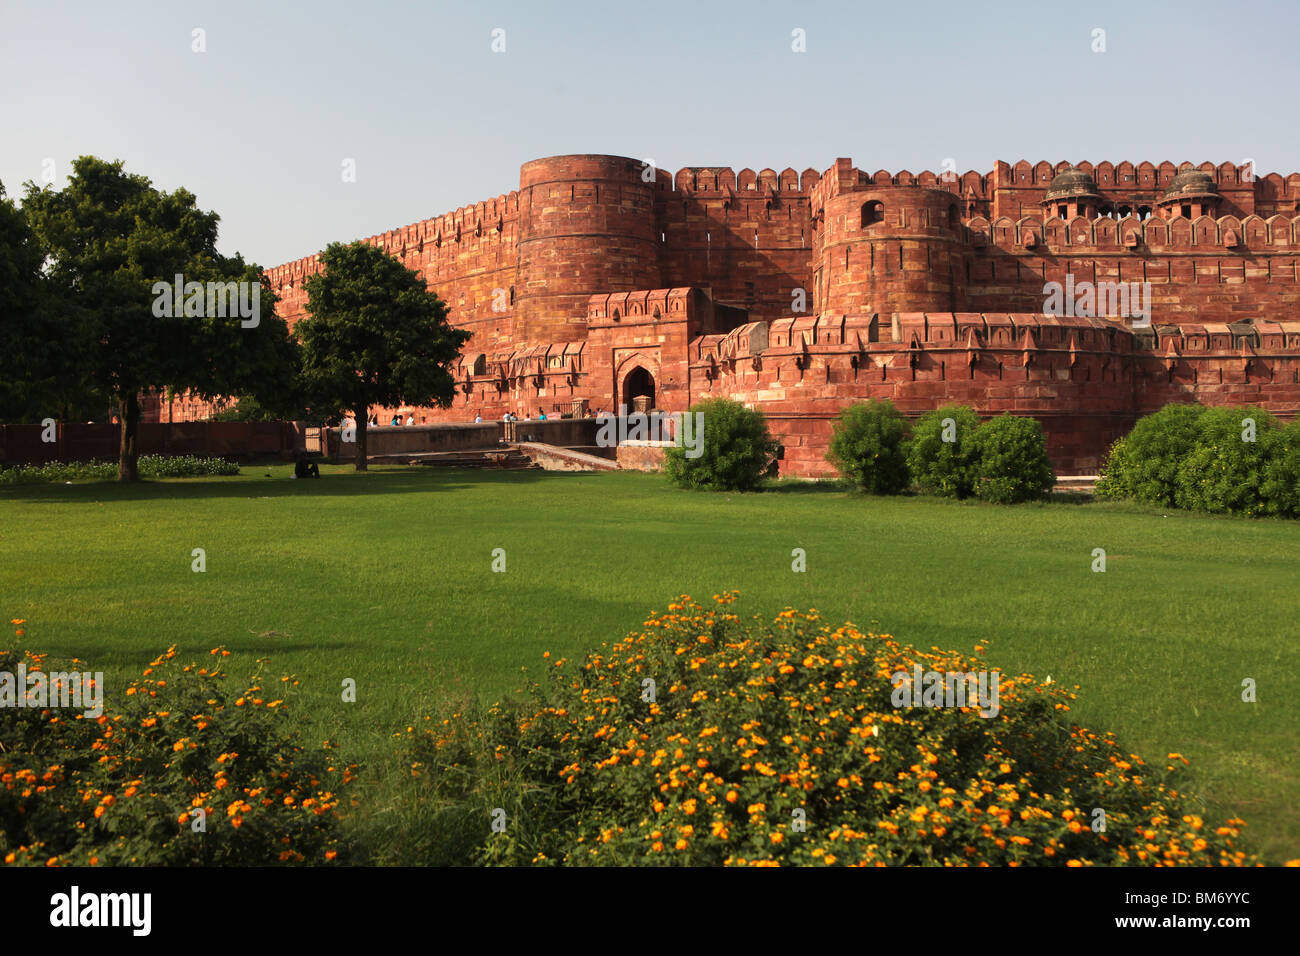 The main gate to the Red Fort in Delhi in India. Stock Photo